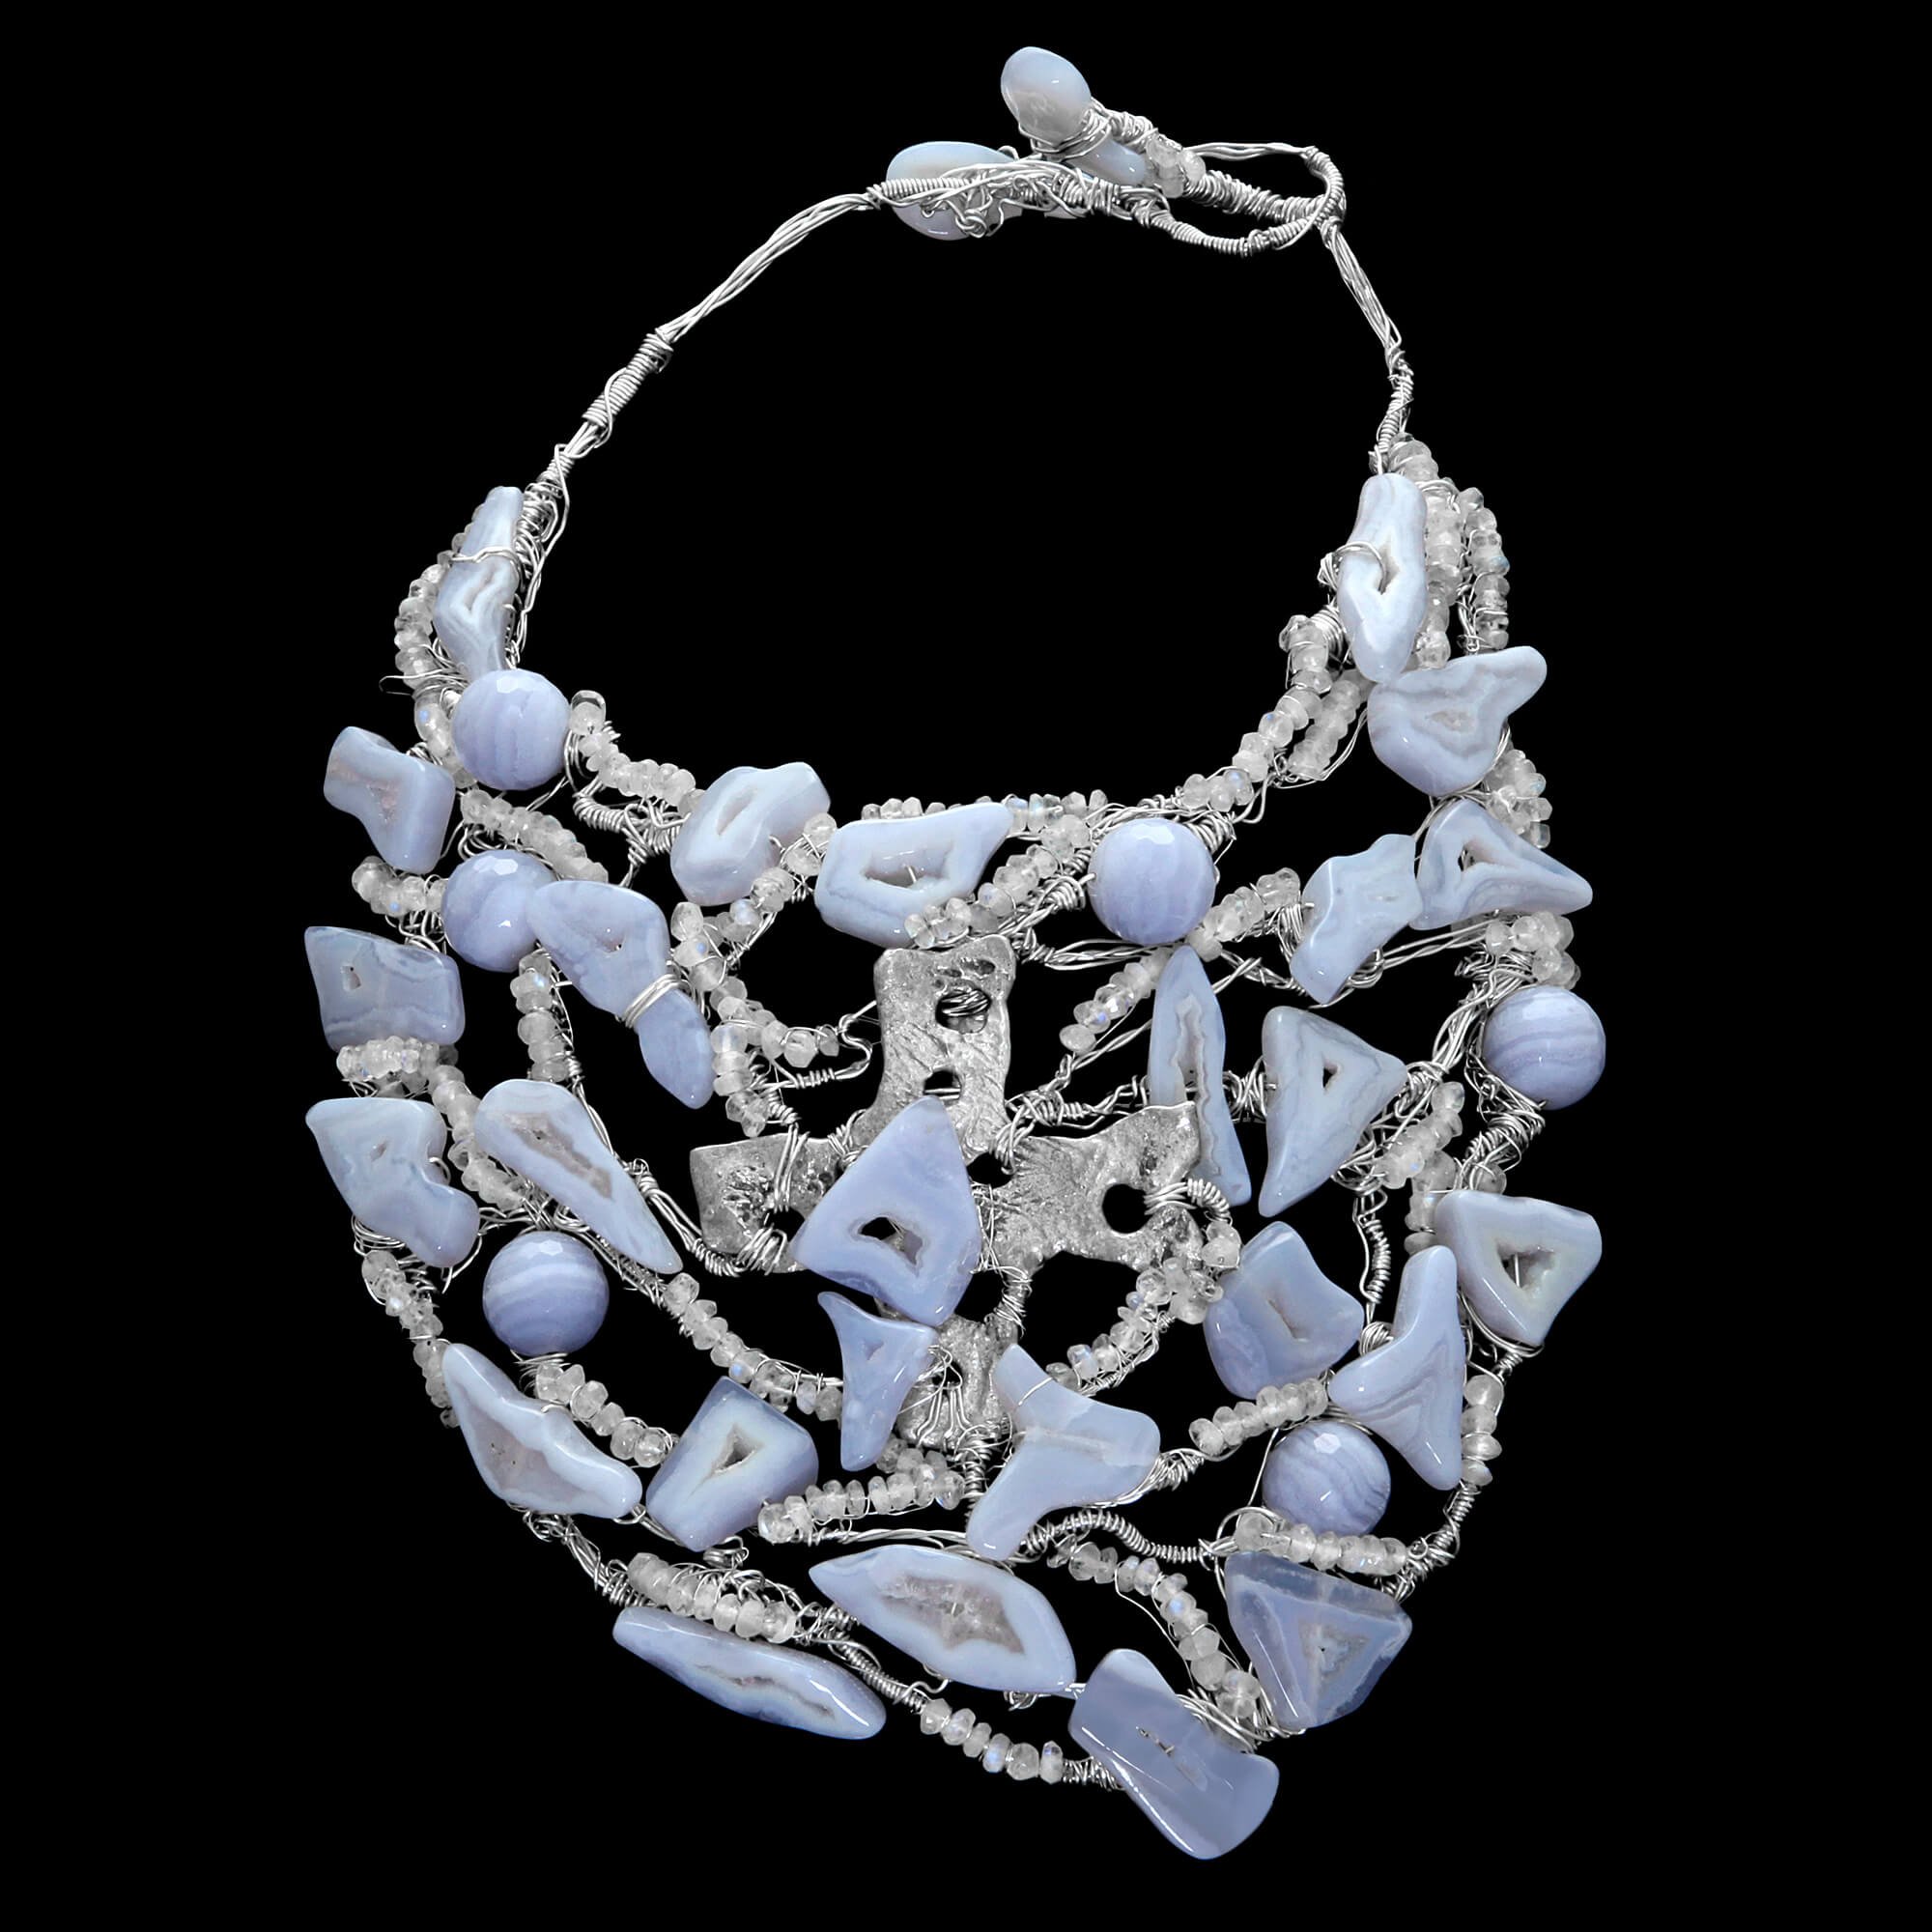 Custom hand-woven Sky neck sculpture with blue lace agate, moonstone and a sterling silver sculpture - Caribou Collection. FRIDA | Fine Jewellery.jpg